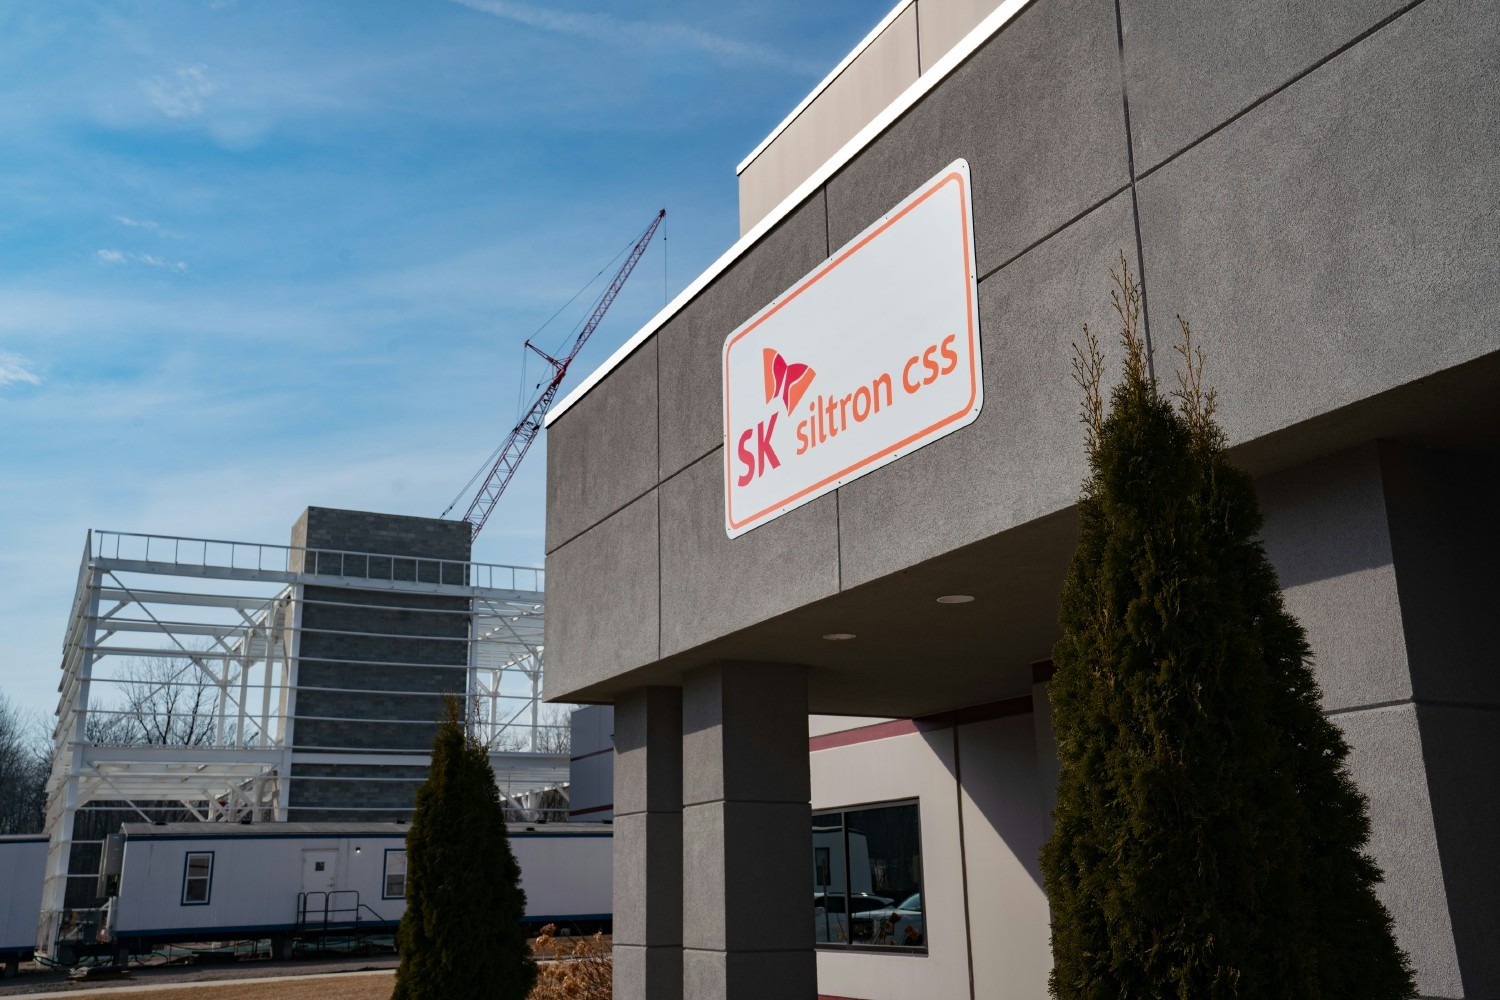 SK siltron css’ new facility in Bay City Michigan leverages an existing 145,000 square foot combined office and manufacturing space that is currently being augmented by a 100,000 square foot addition now under construction.  This facility is the company’s global headquarters and will continue to serve as a mixed office and production space.  Additional manufacturing sites in Auburn, Michigan and Gumi, South Korea continue to expand global wafering manufacturing capacity as well. 